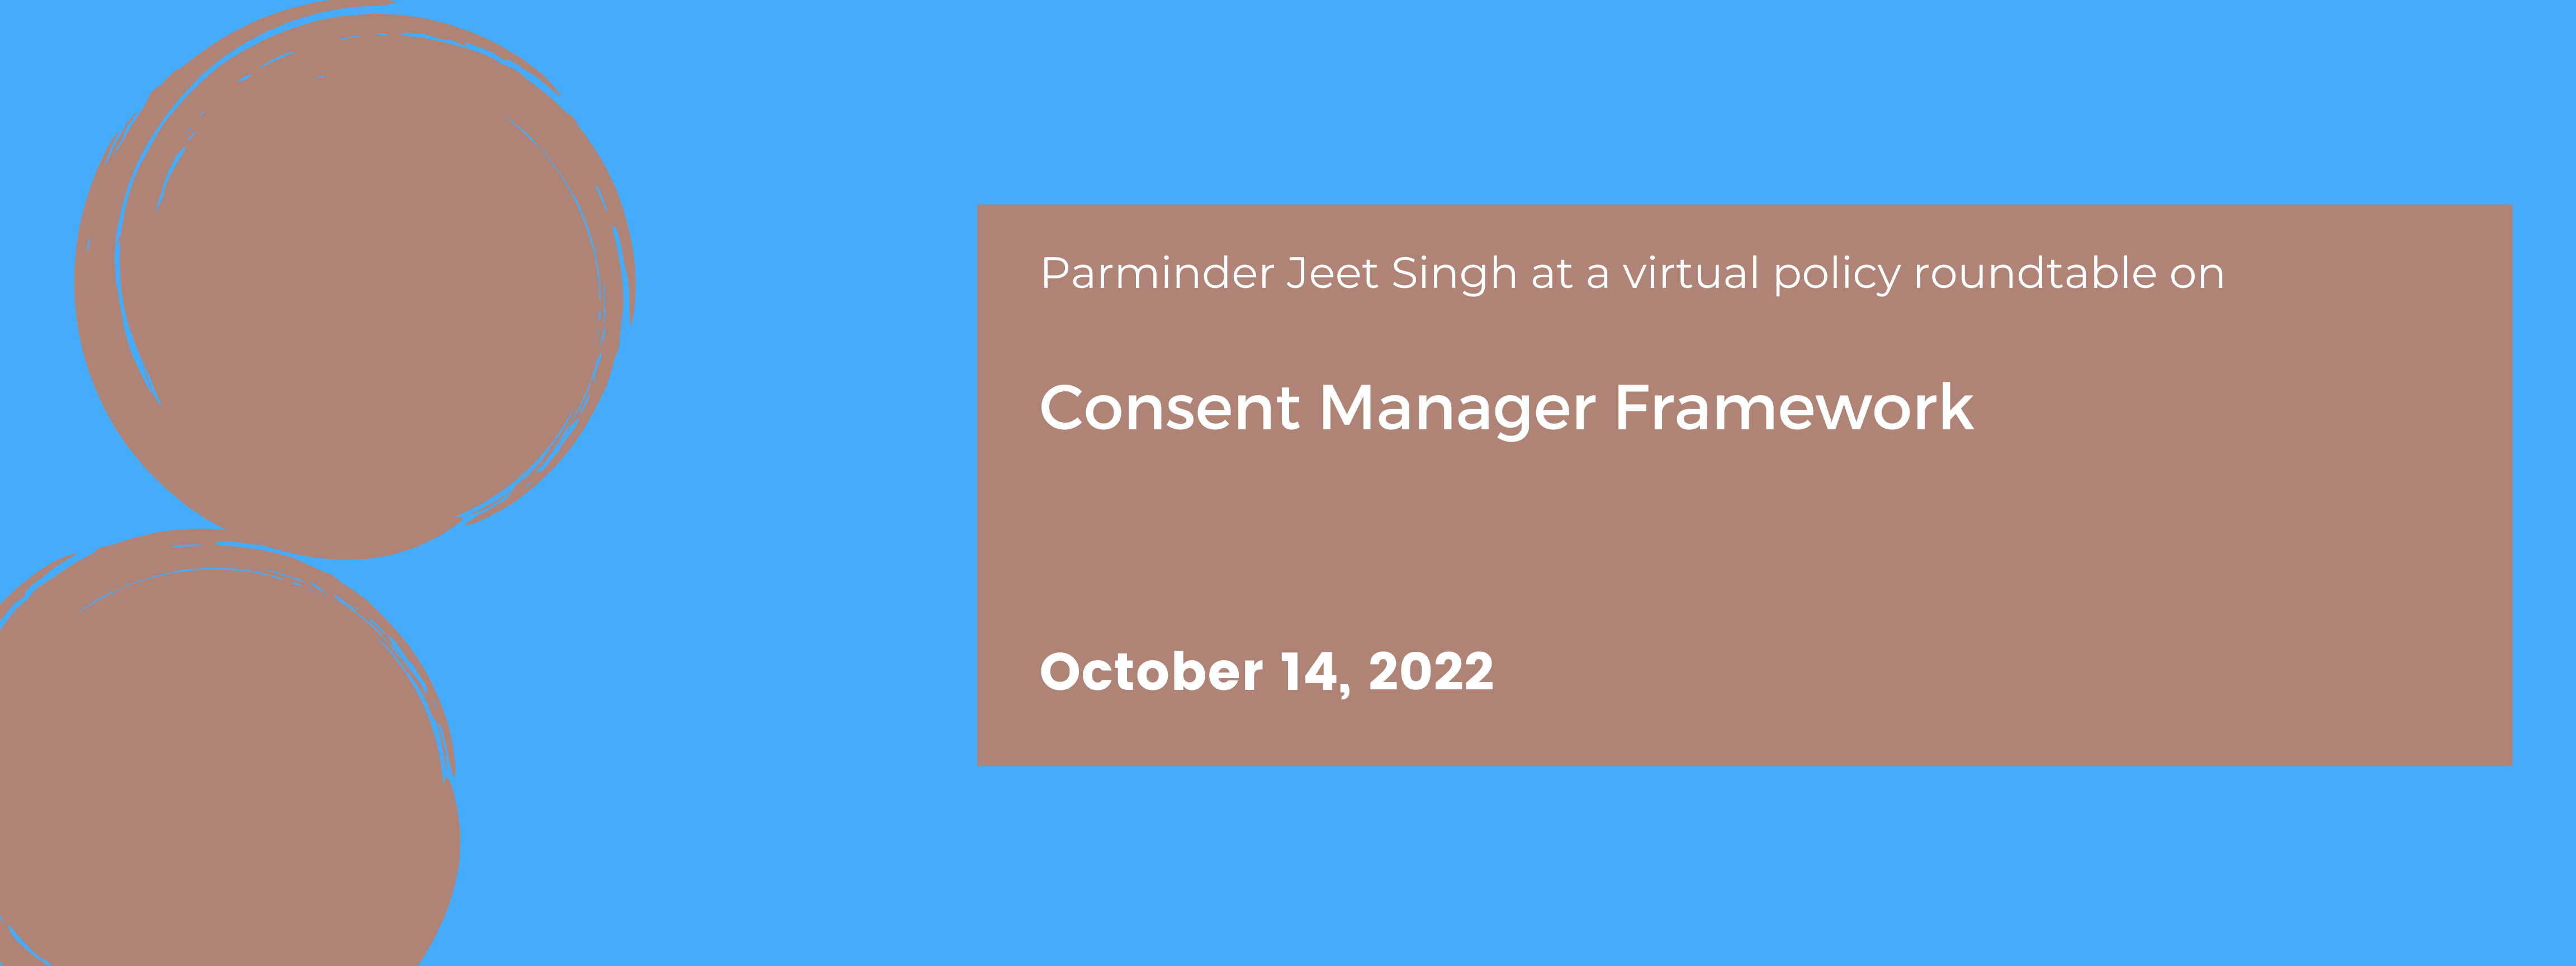 Virtual Policy Roundtable on Consent Manager Framework